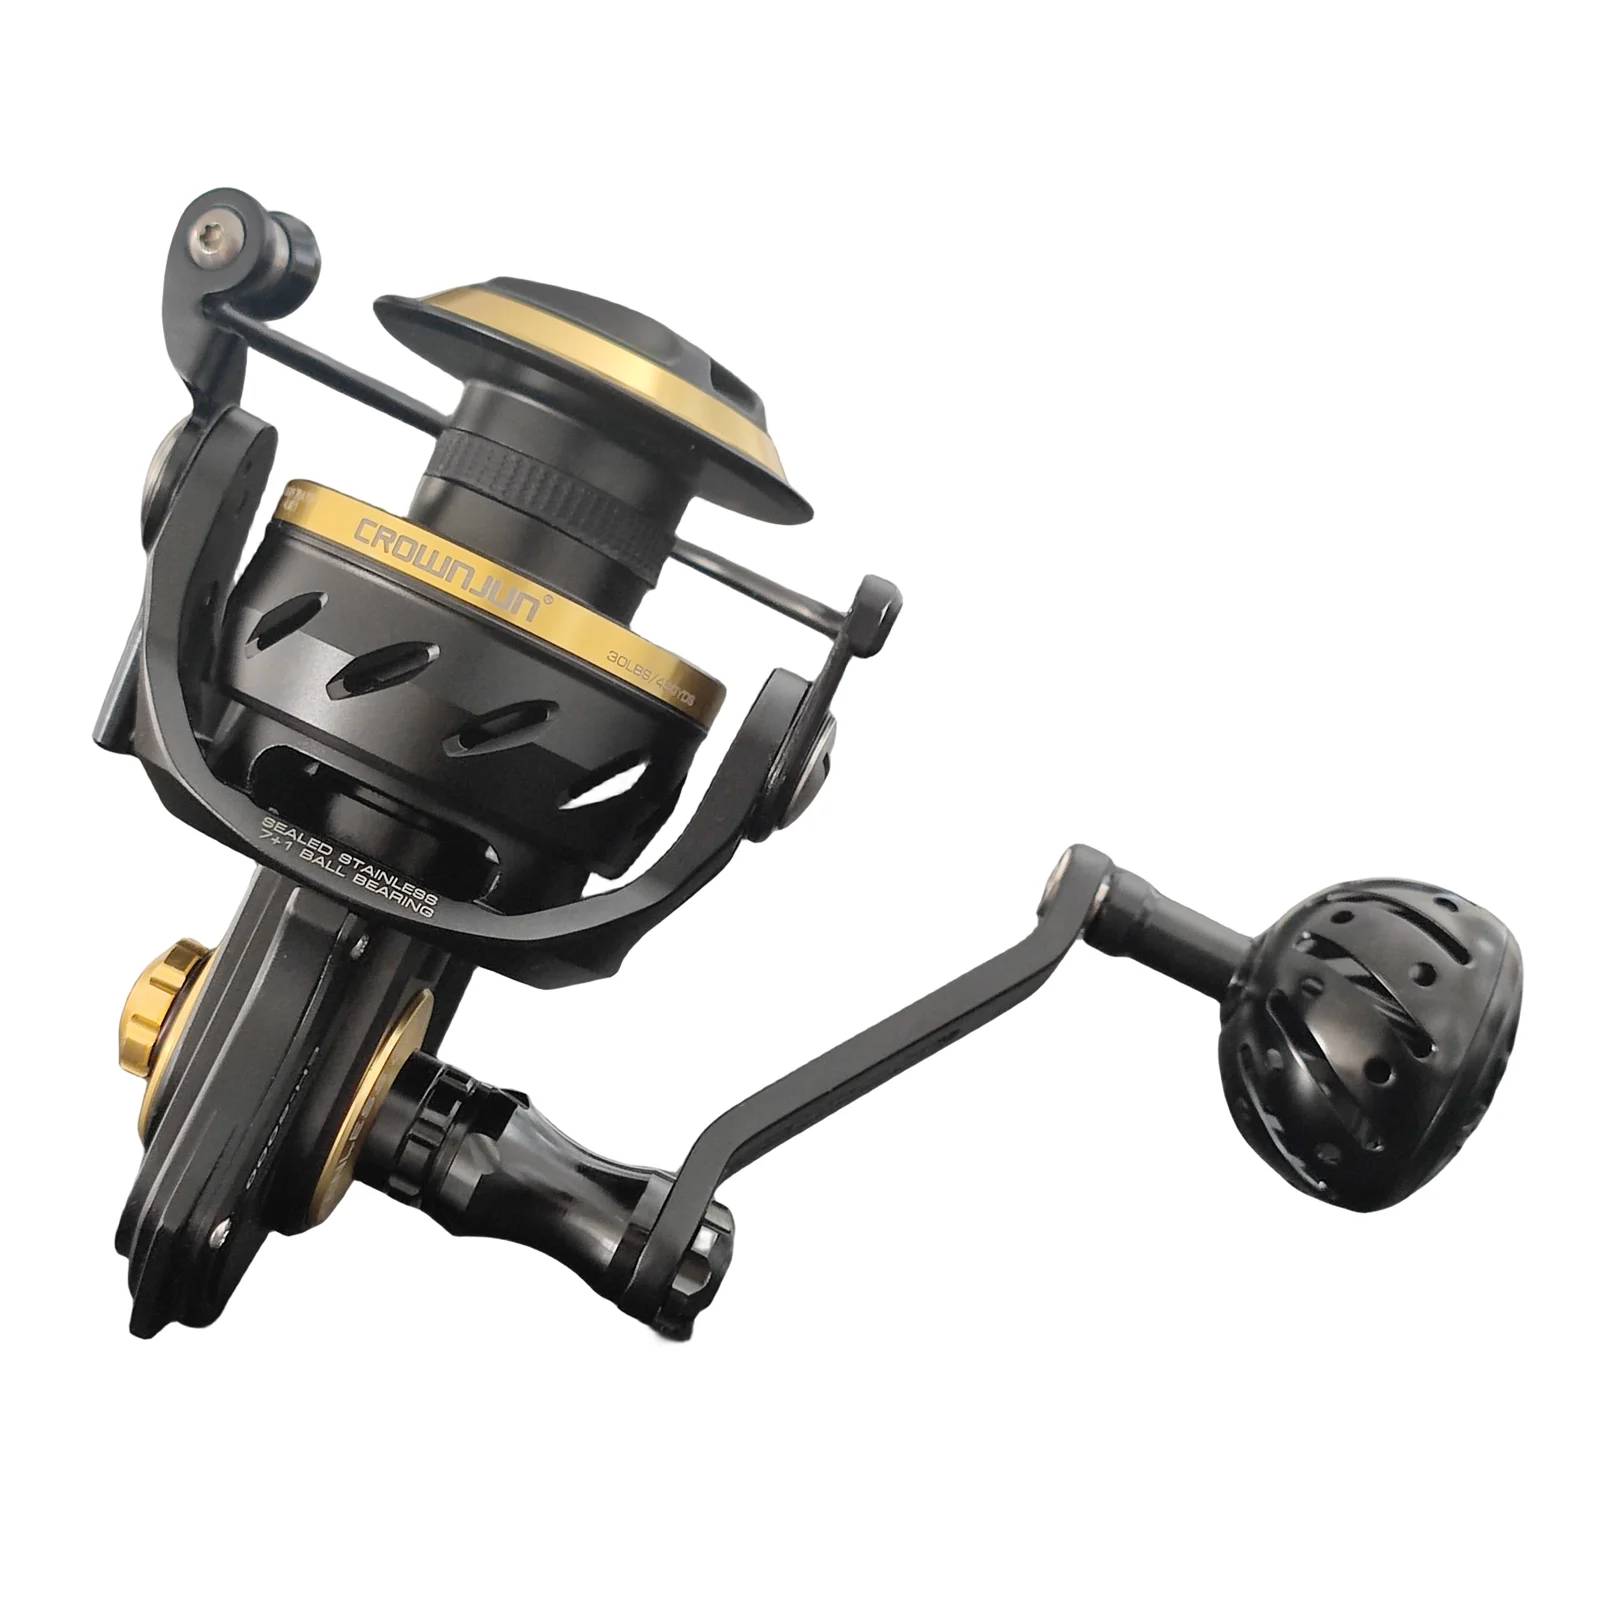 

CROWNJUN Wholesale 4.9:1 Gear ratio Left and Right hand Lightweight Fishing Spinning Reel For saltwater fishing